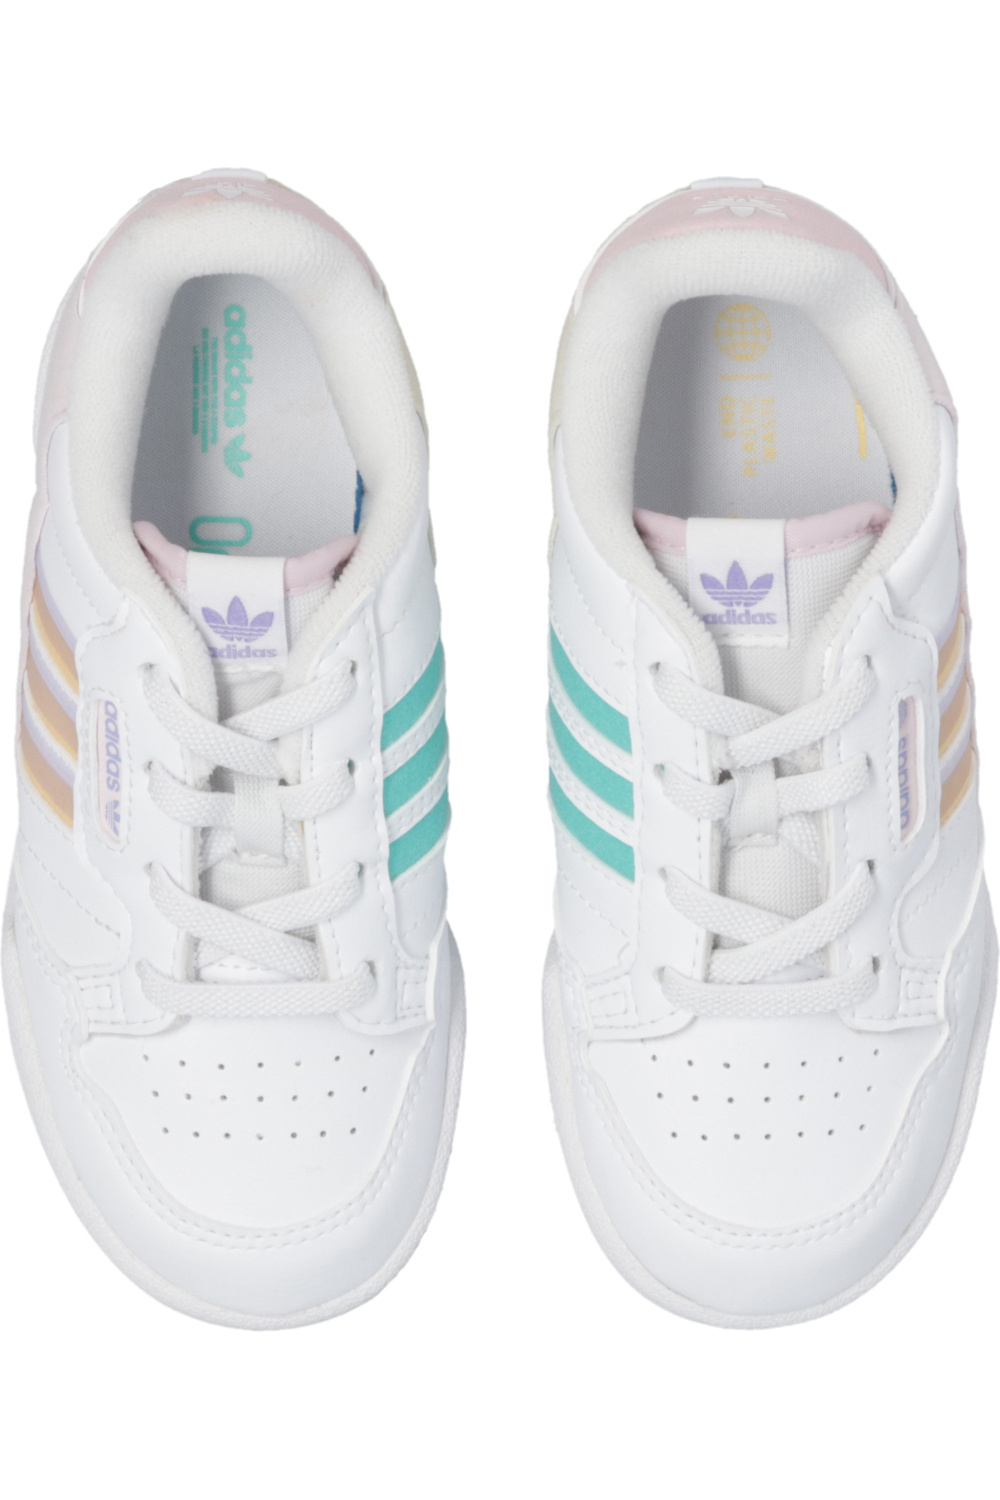 ADIDAS Kids ‘Continental 80 mikiny’ sneakers